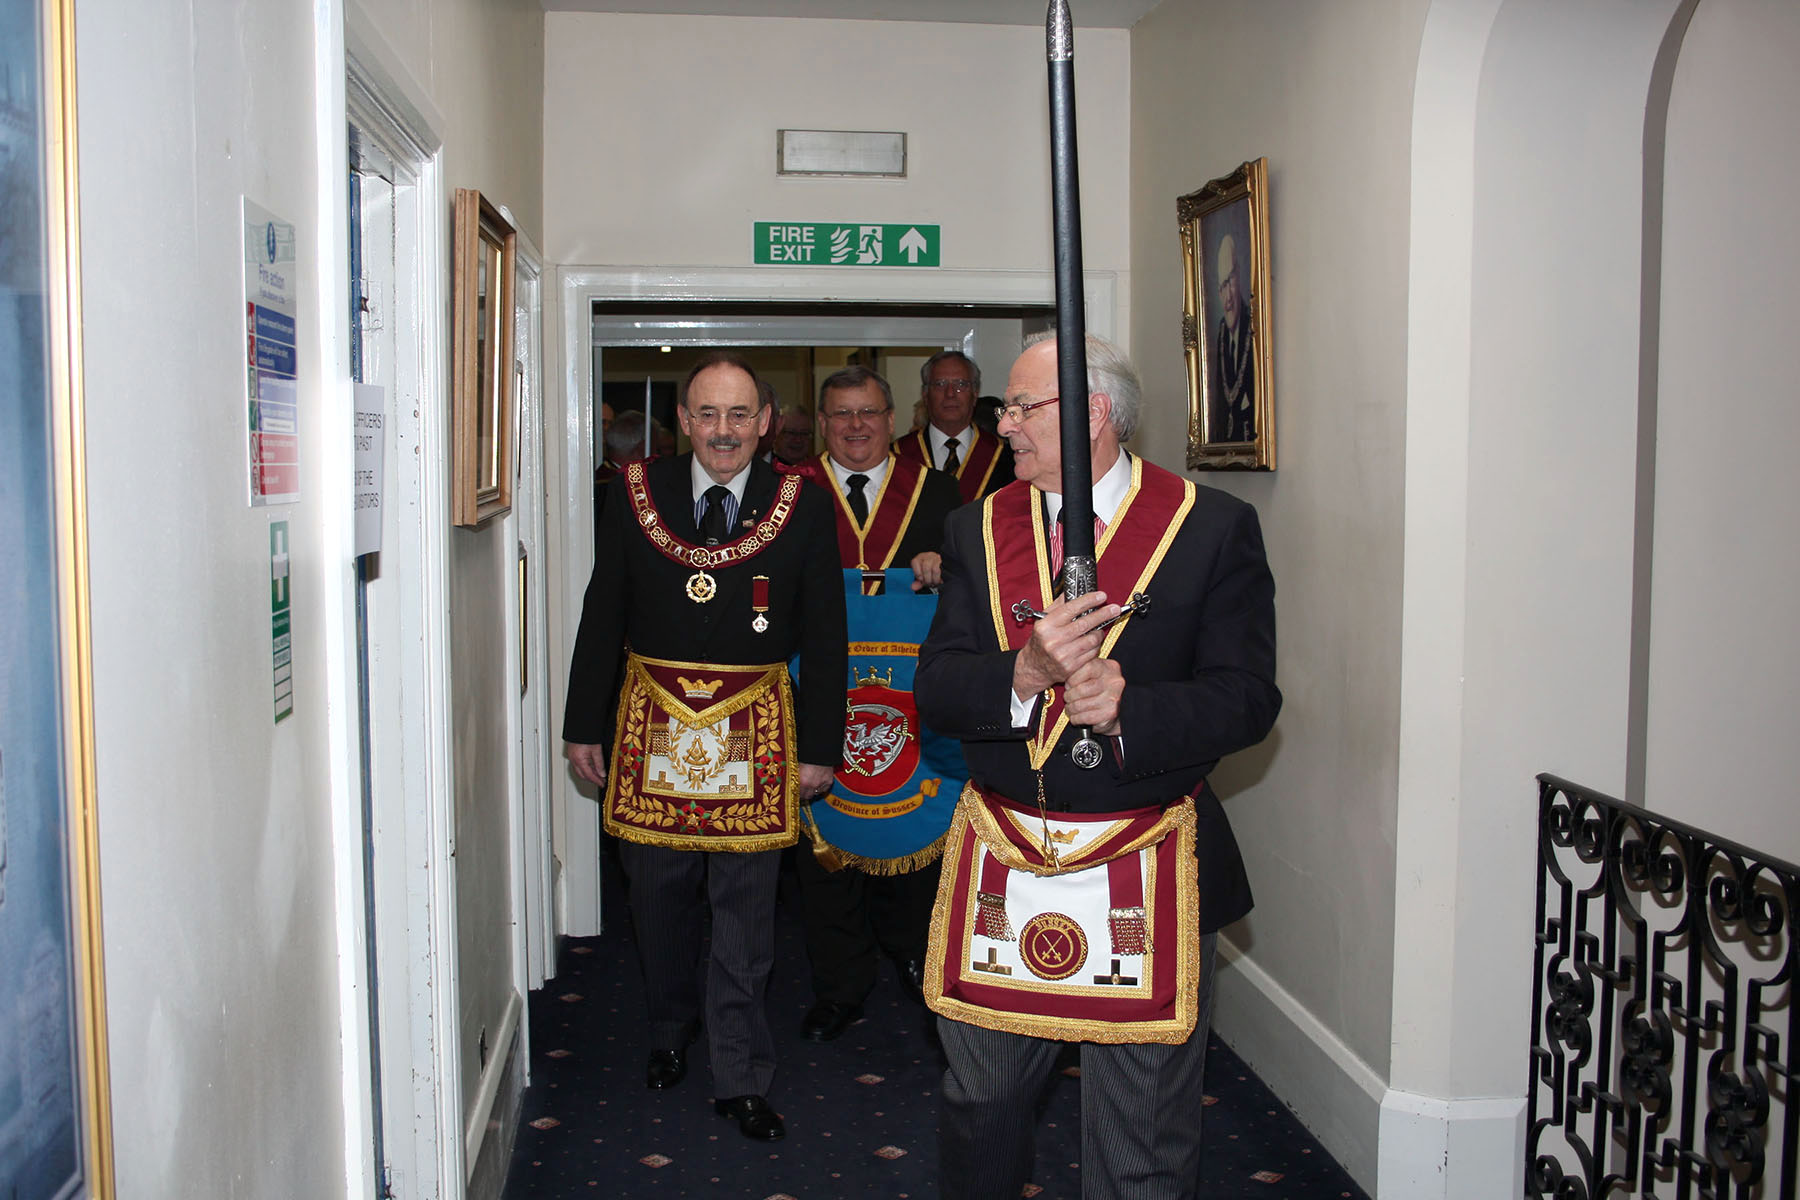 Annual Assembly of Provincial Grand Court of Sussex 2017